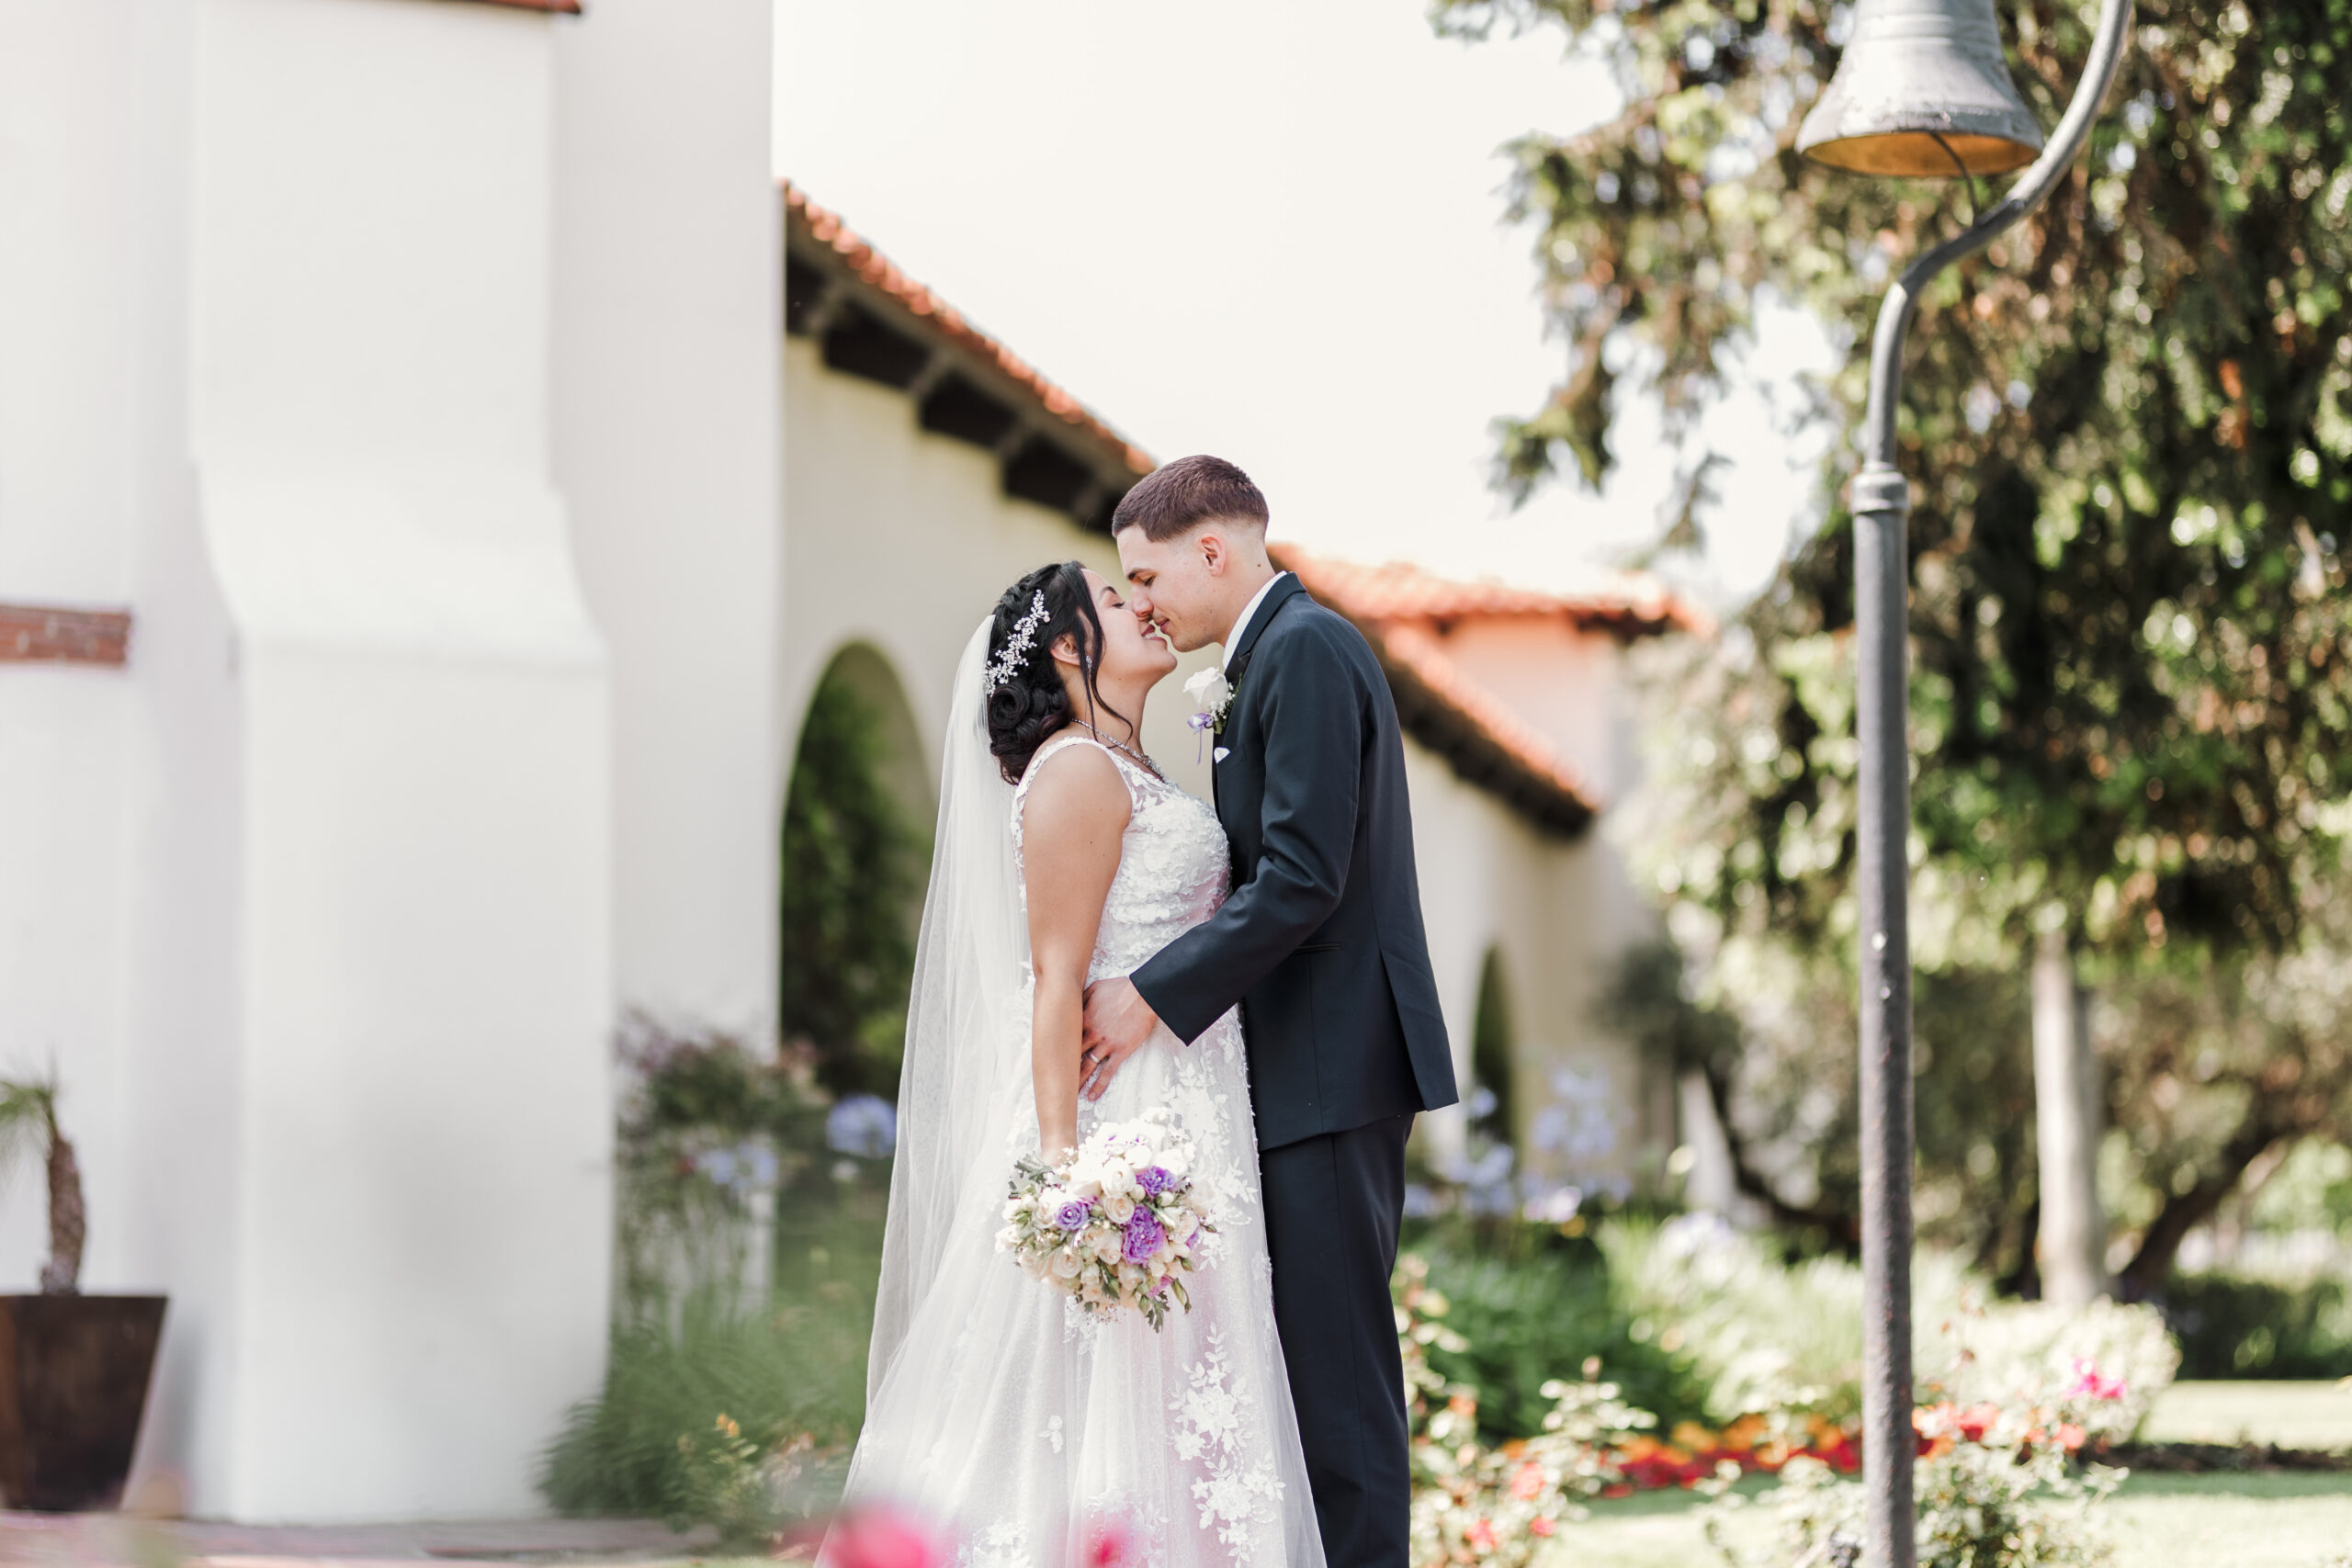 Newlyweds share a kiss at Bowers Museum in Santa Ana Ca